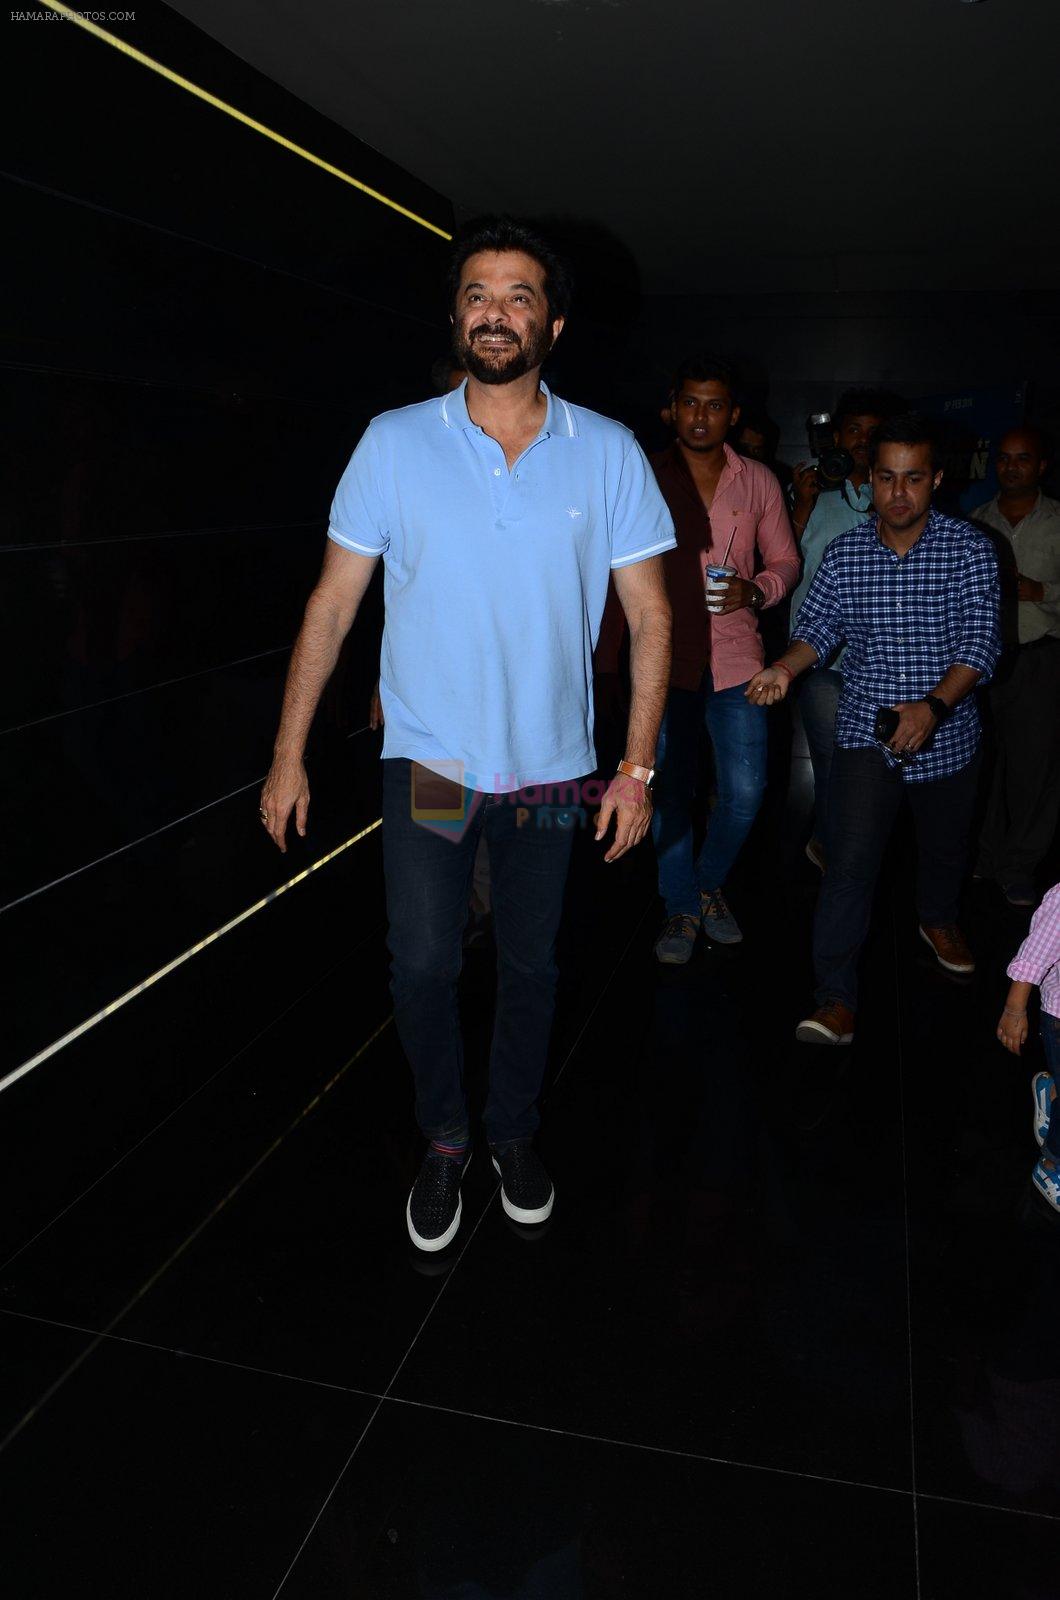 Anil Kapoor at Bollywood Diaries and Tere Bin Laden 2 screening in Cinepolis on 25th Feb 2016